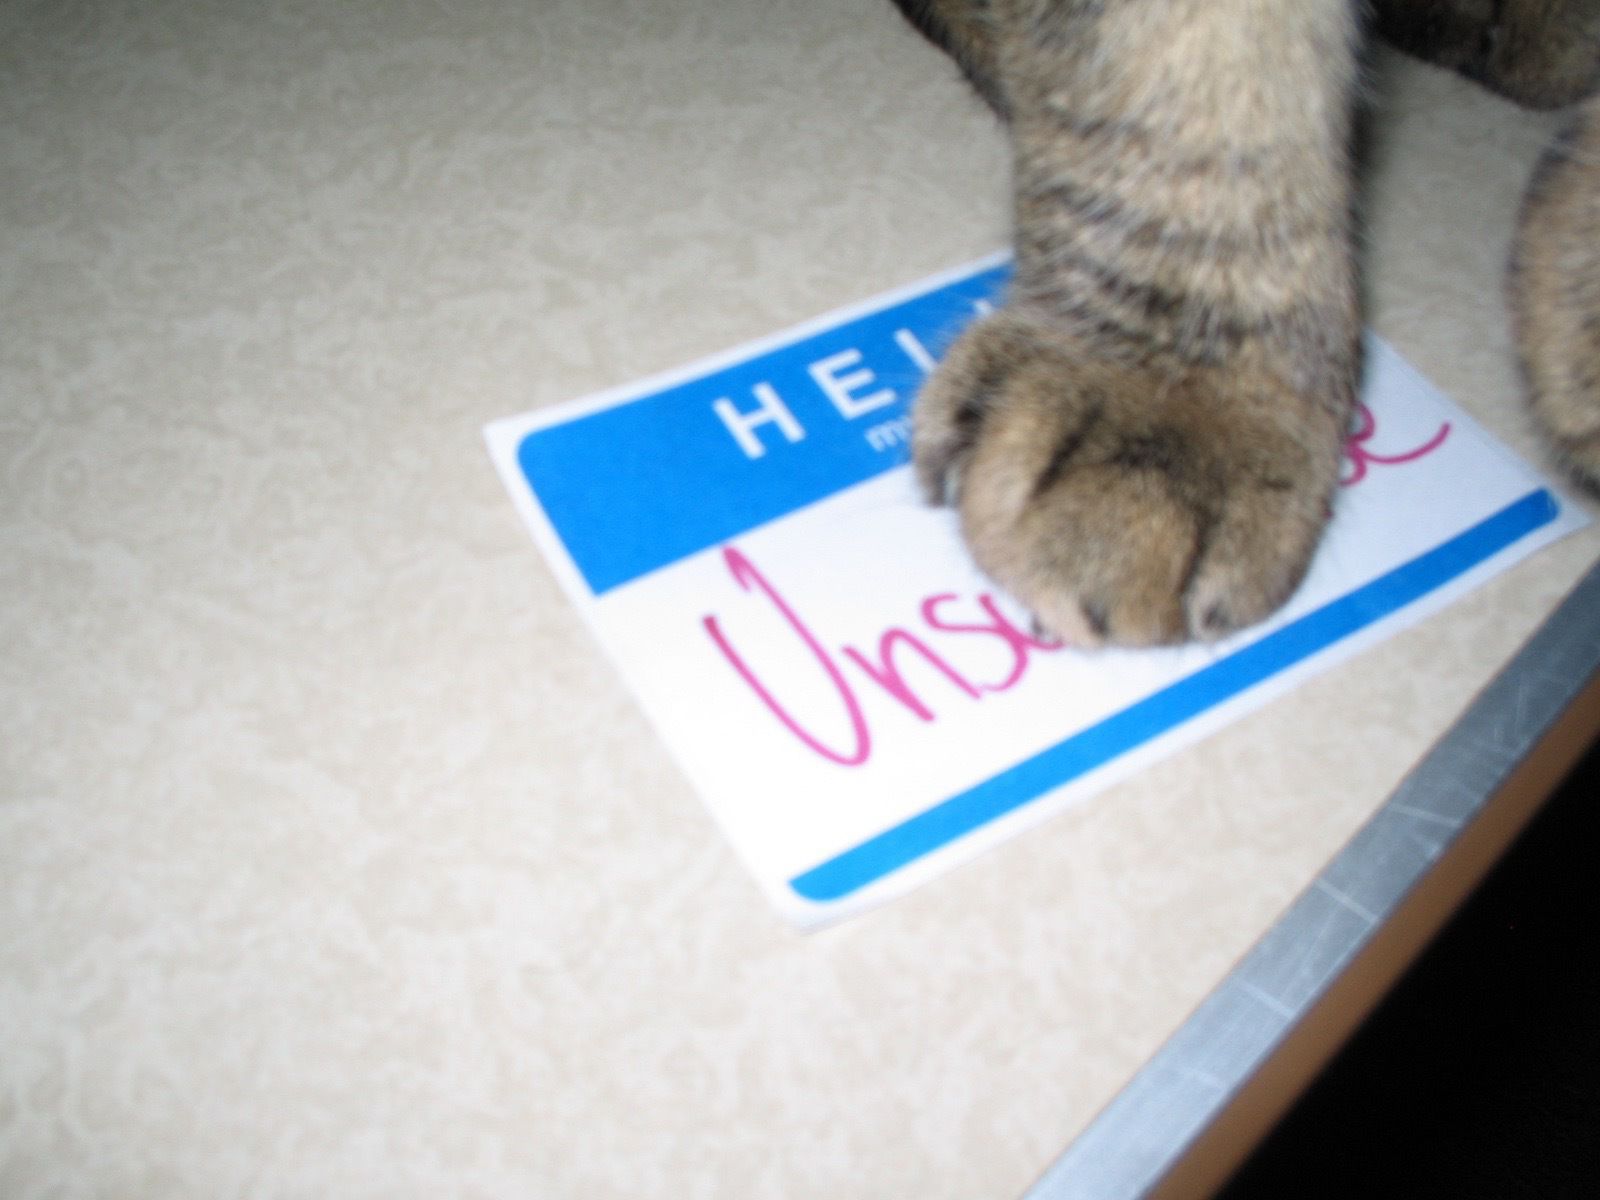 Name tag sticker with the handwritten name “Unsubscribe” — and a gray tabby’s paw on top of the sticker.